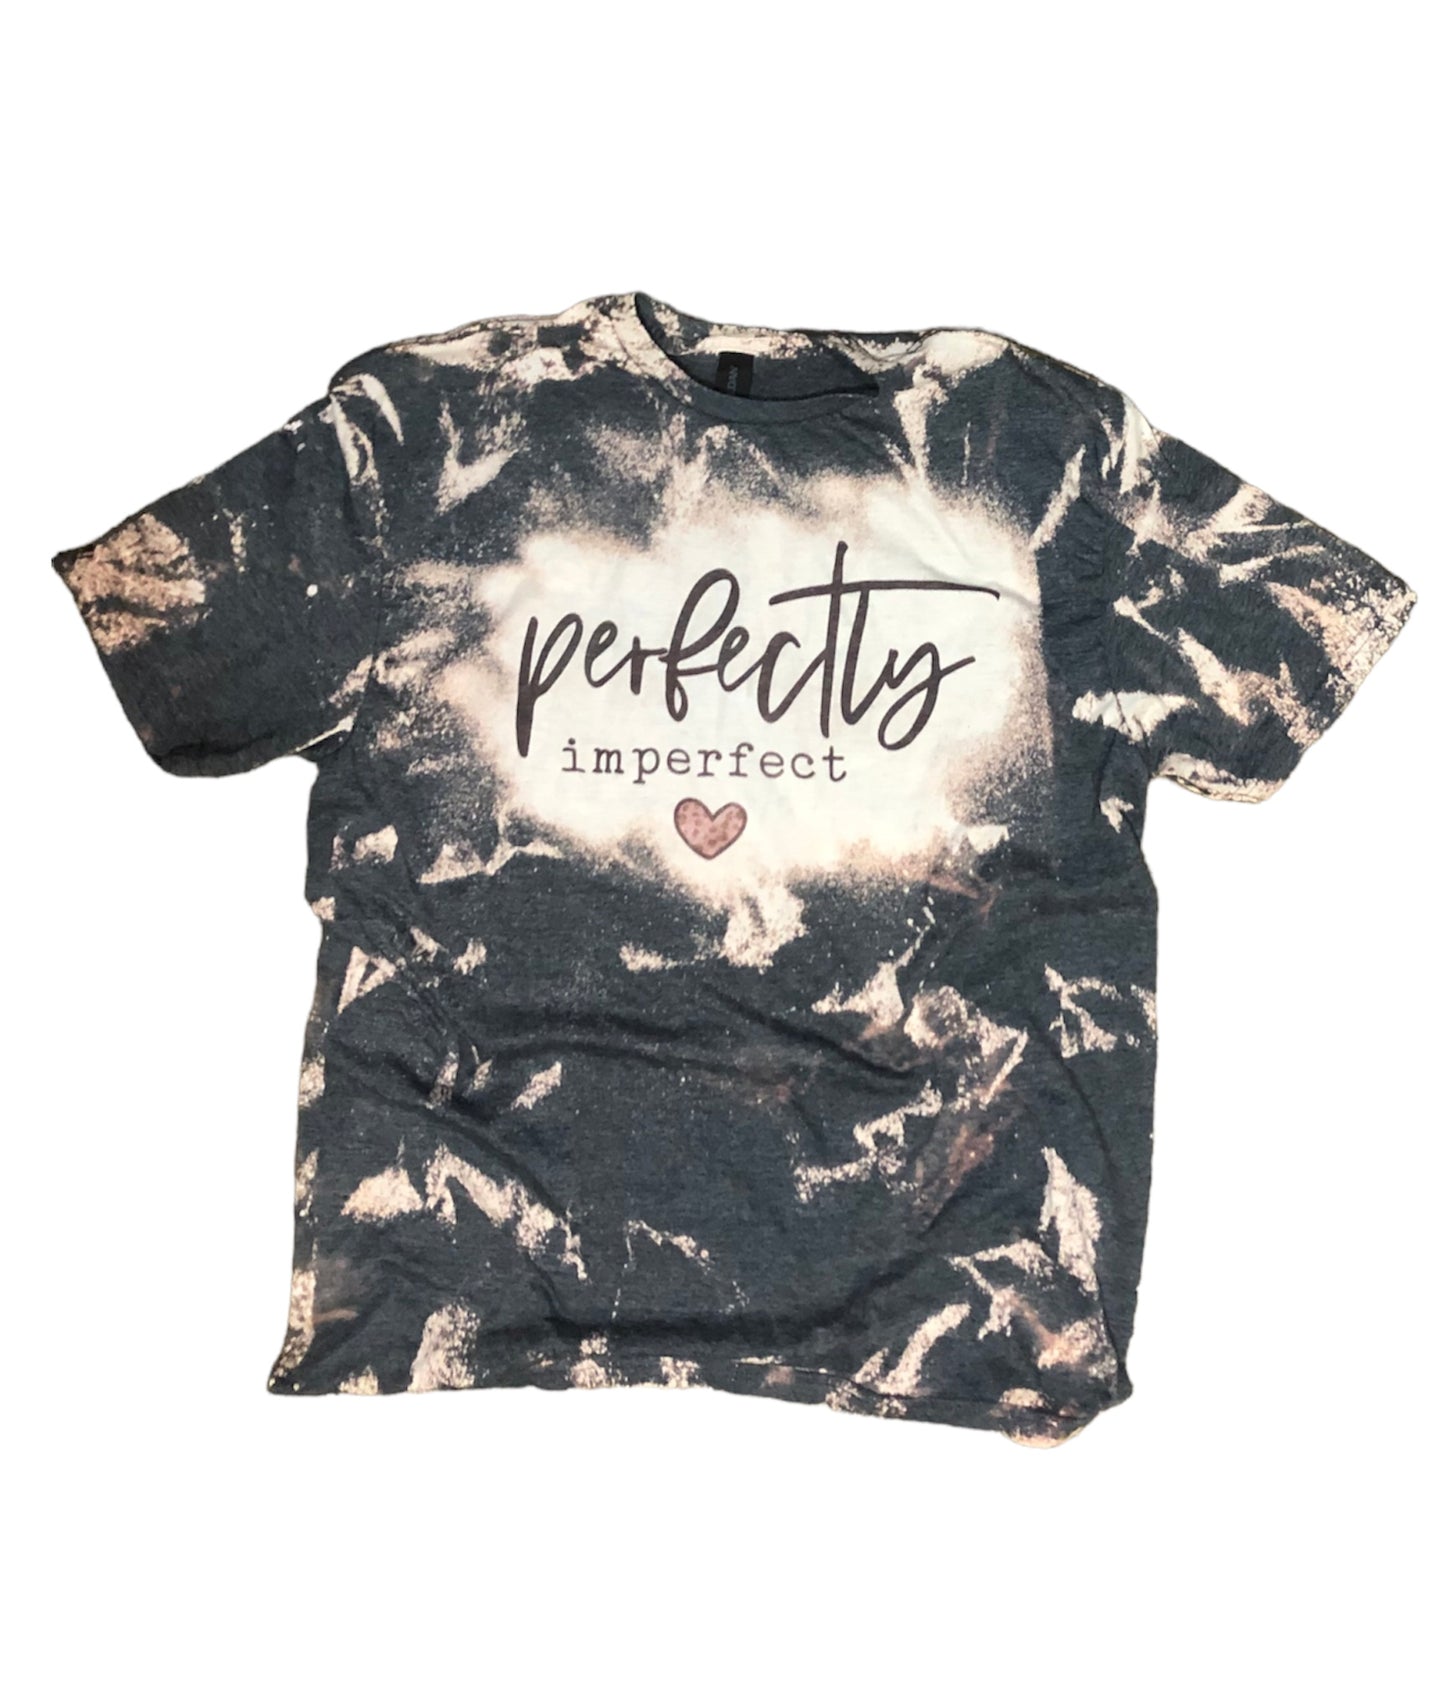 Perfectly Imperfect Bleached Tee